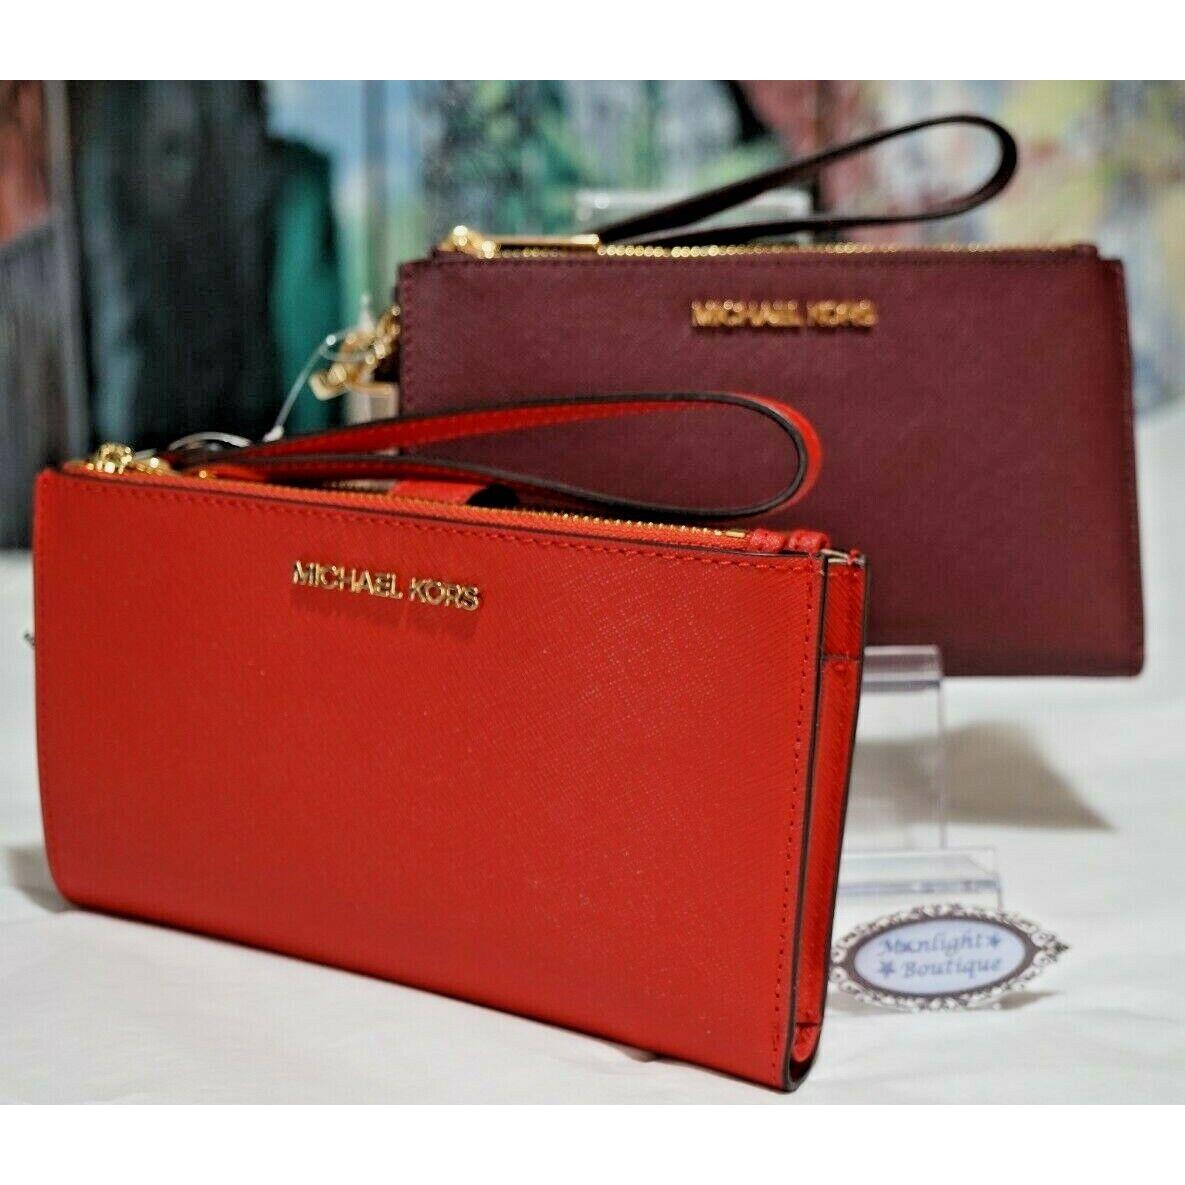 Michael Kors wallet  - Select Your Color: Merlot or Flame 1